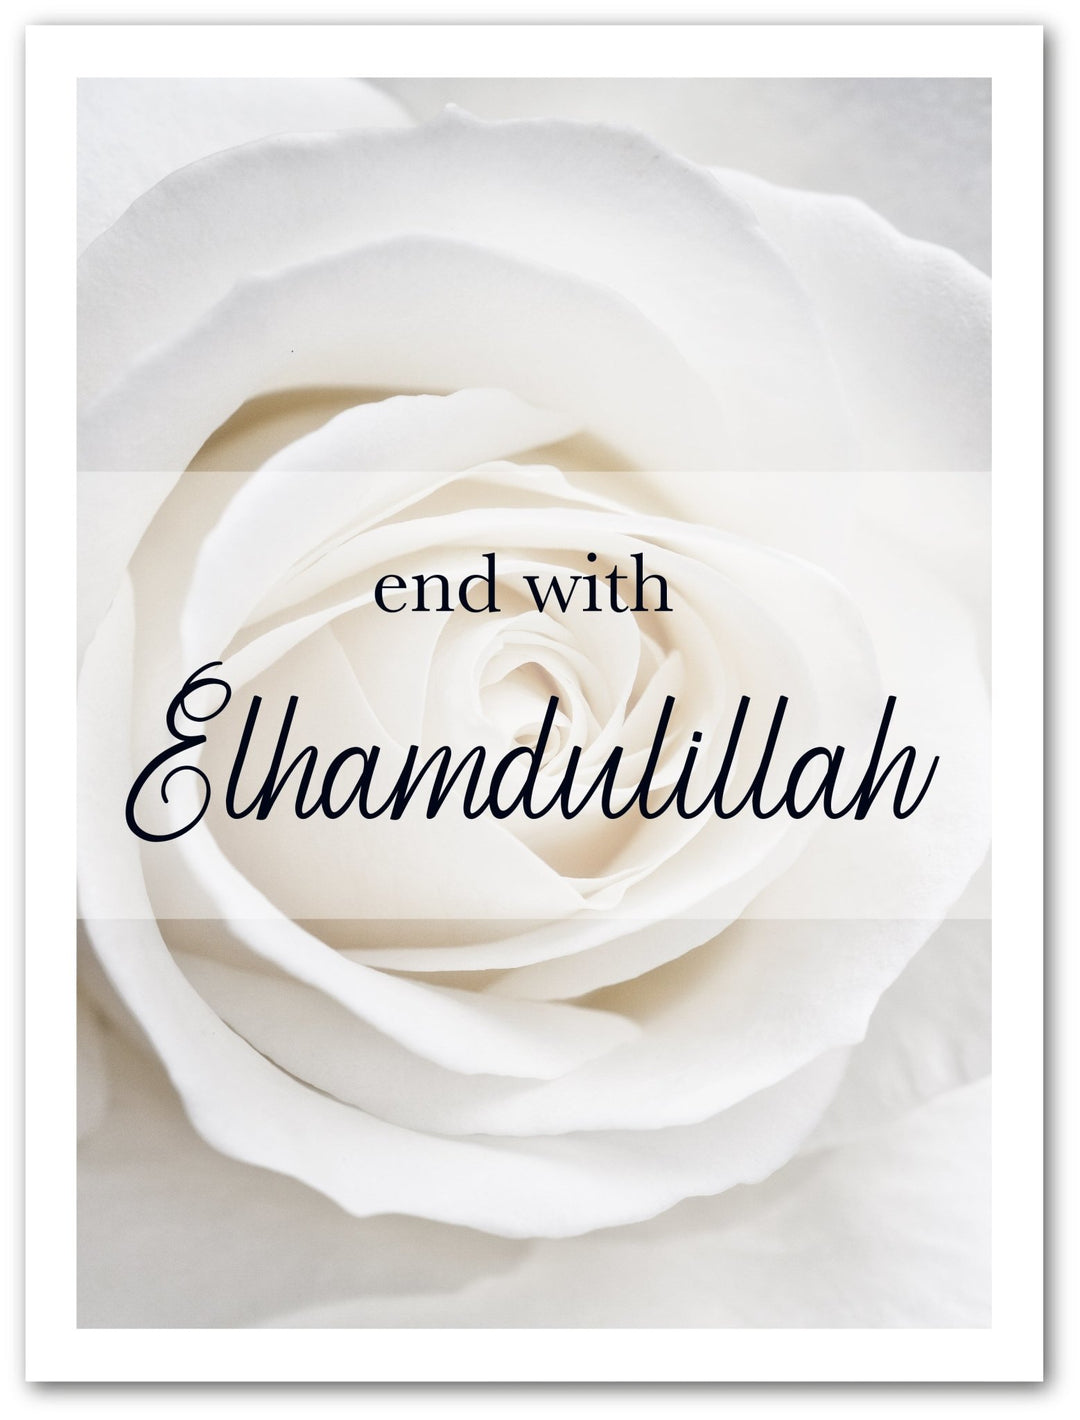 End with Elhamdulillah - Weiße Rose - Beautiful Wall